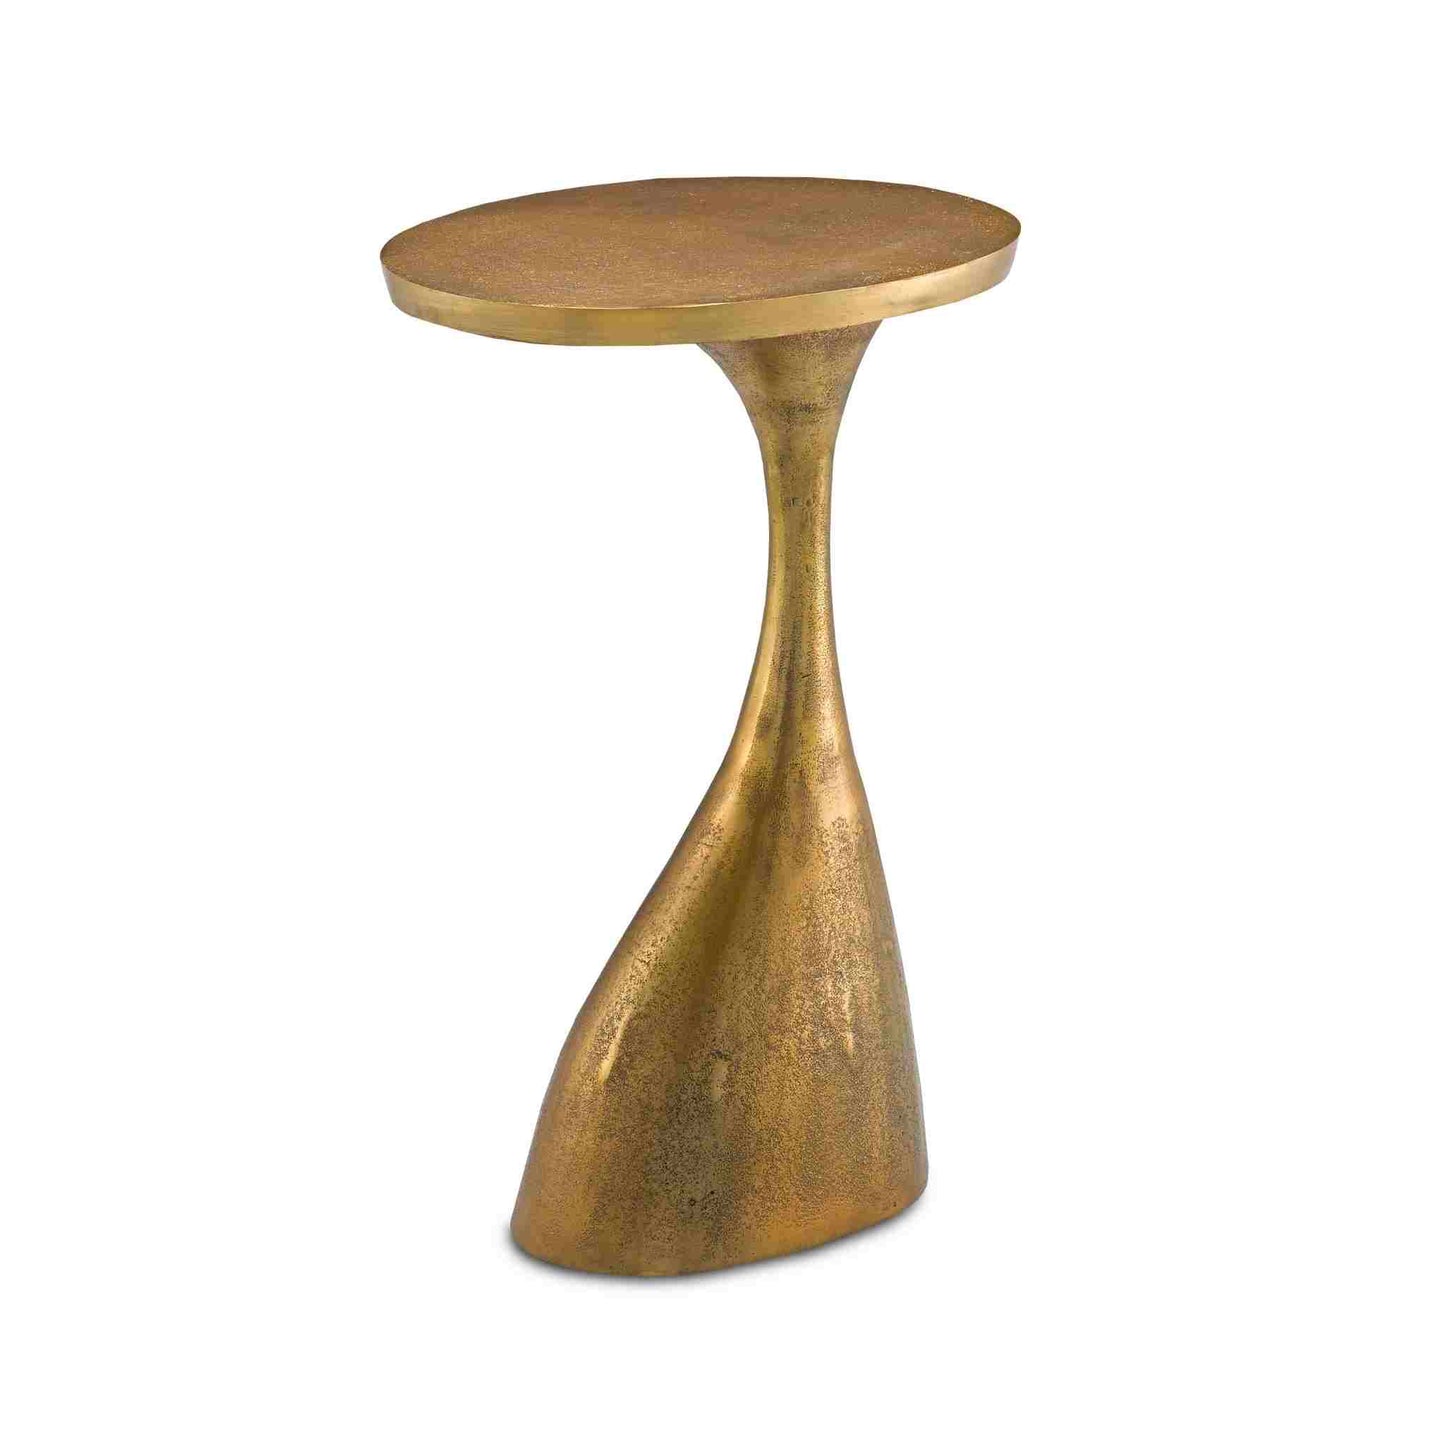 Ishaan Black Accent Table